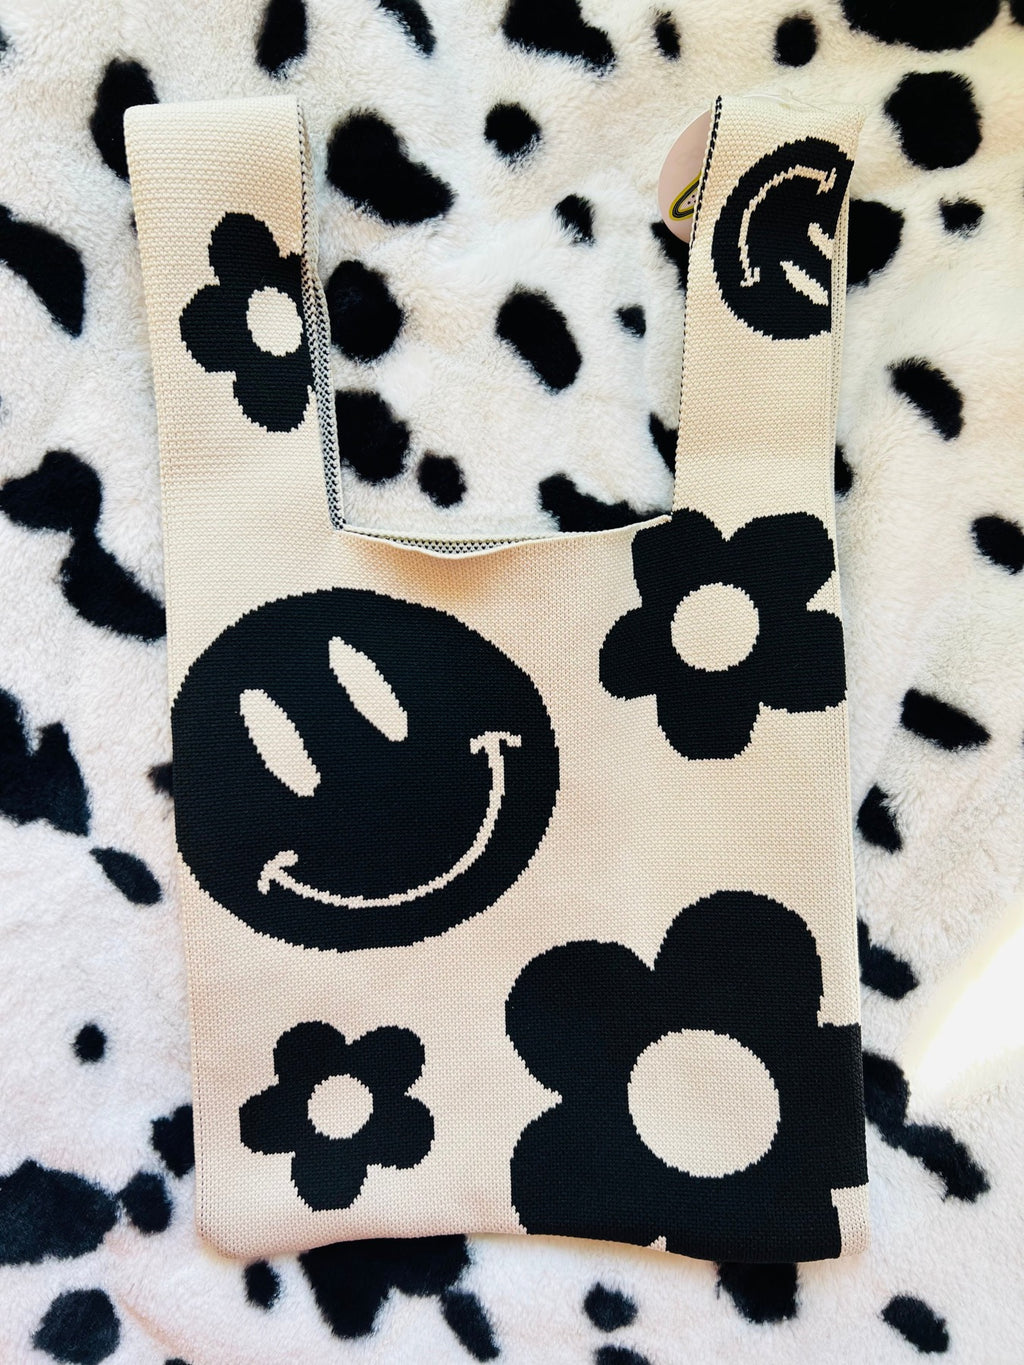 KNIT SMILEY FACE TOTE BAG